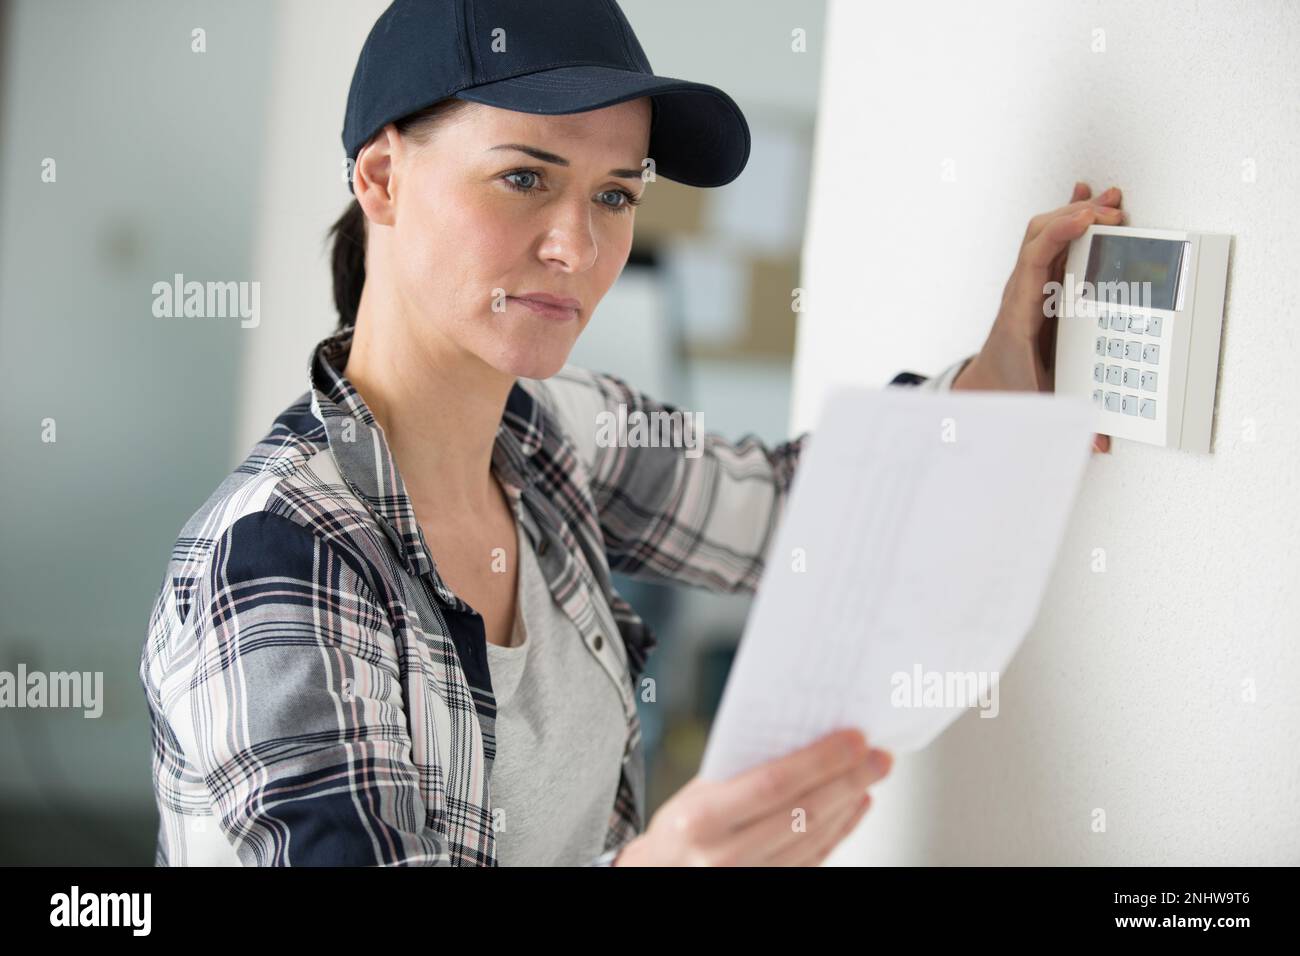 an electrician woman installing thermostat Stock Photo